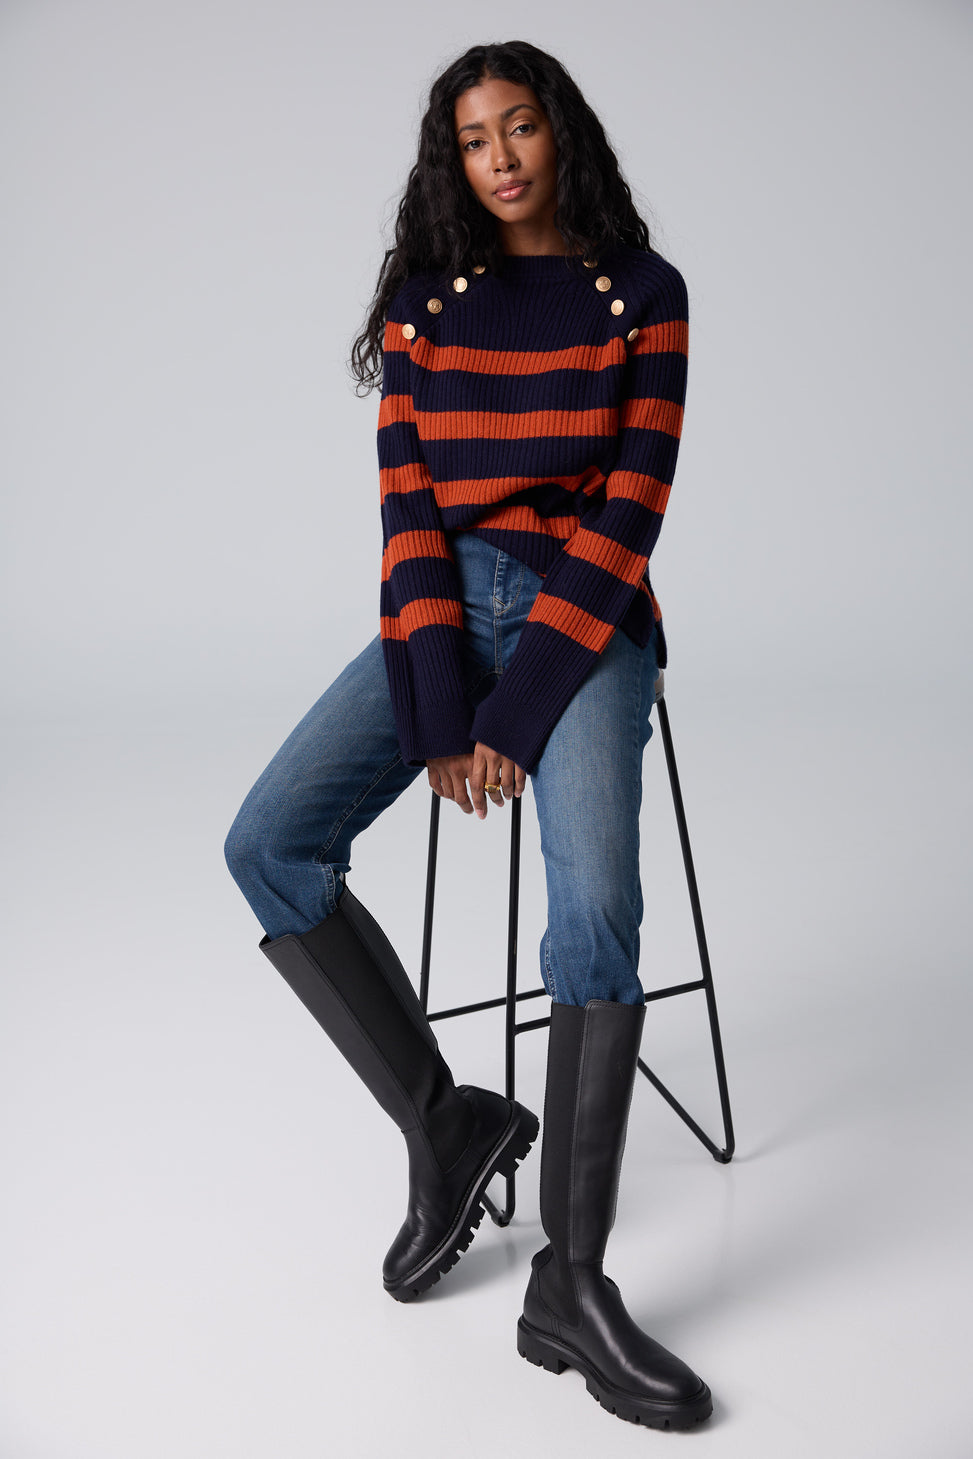 Boxy sailor stripe crew neck sweater with button detail